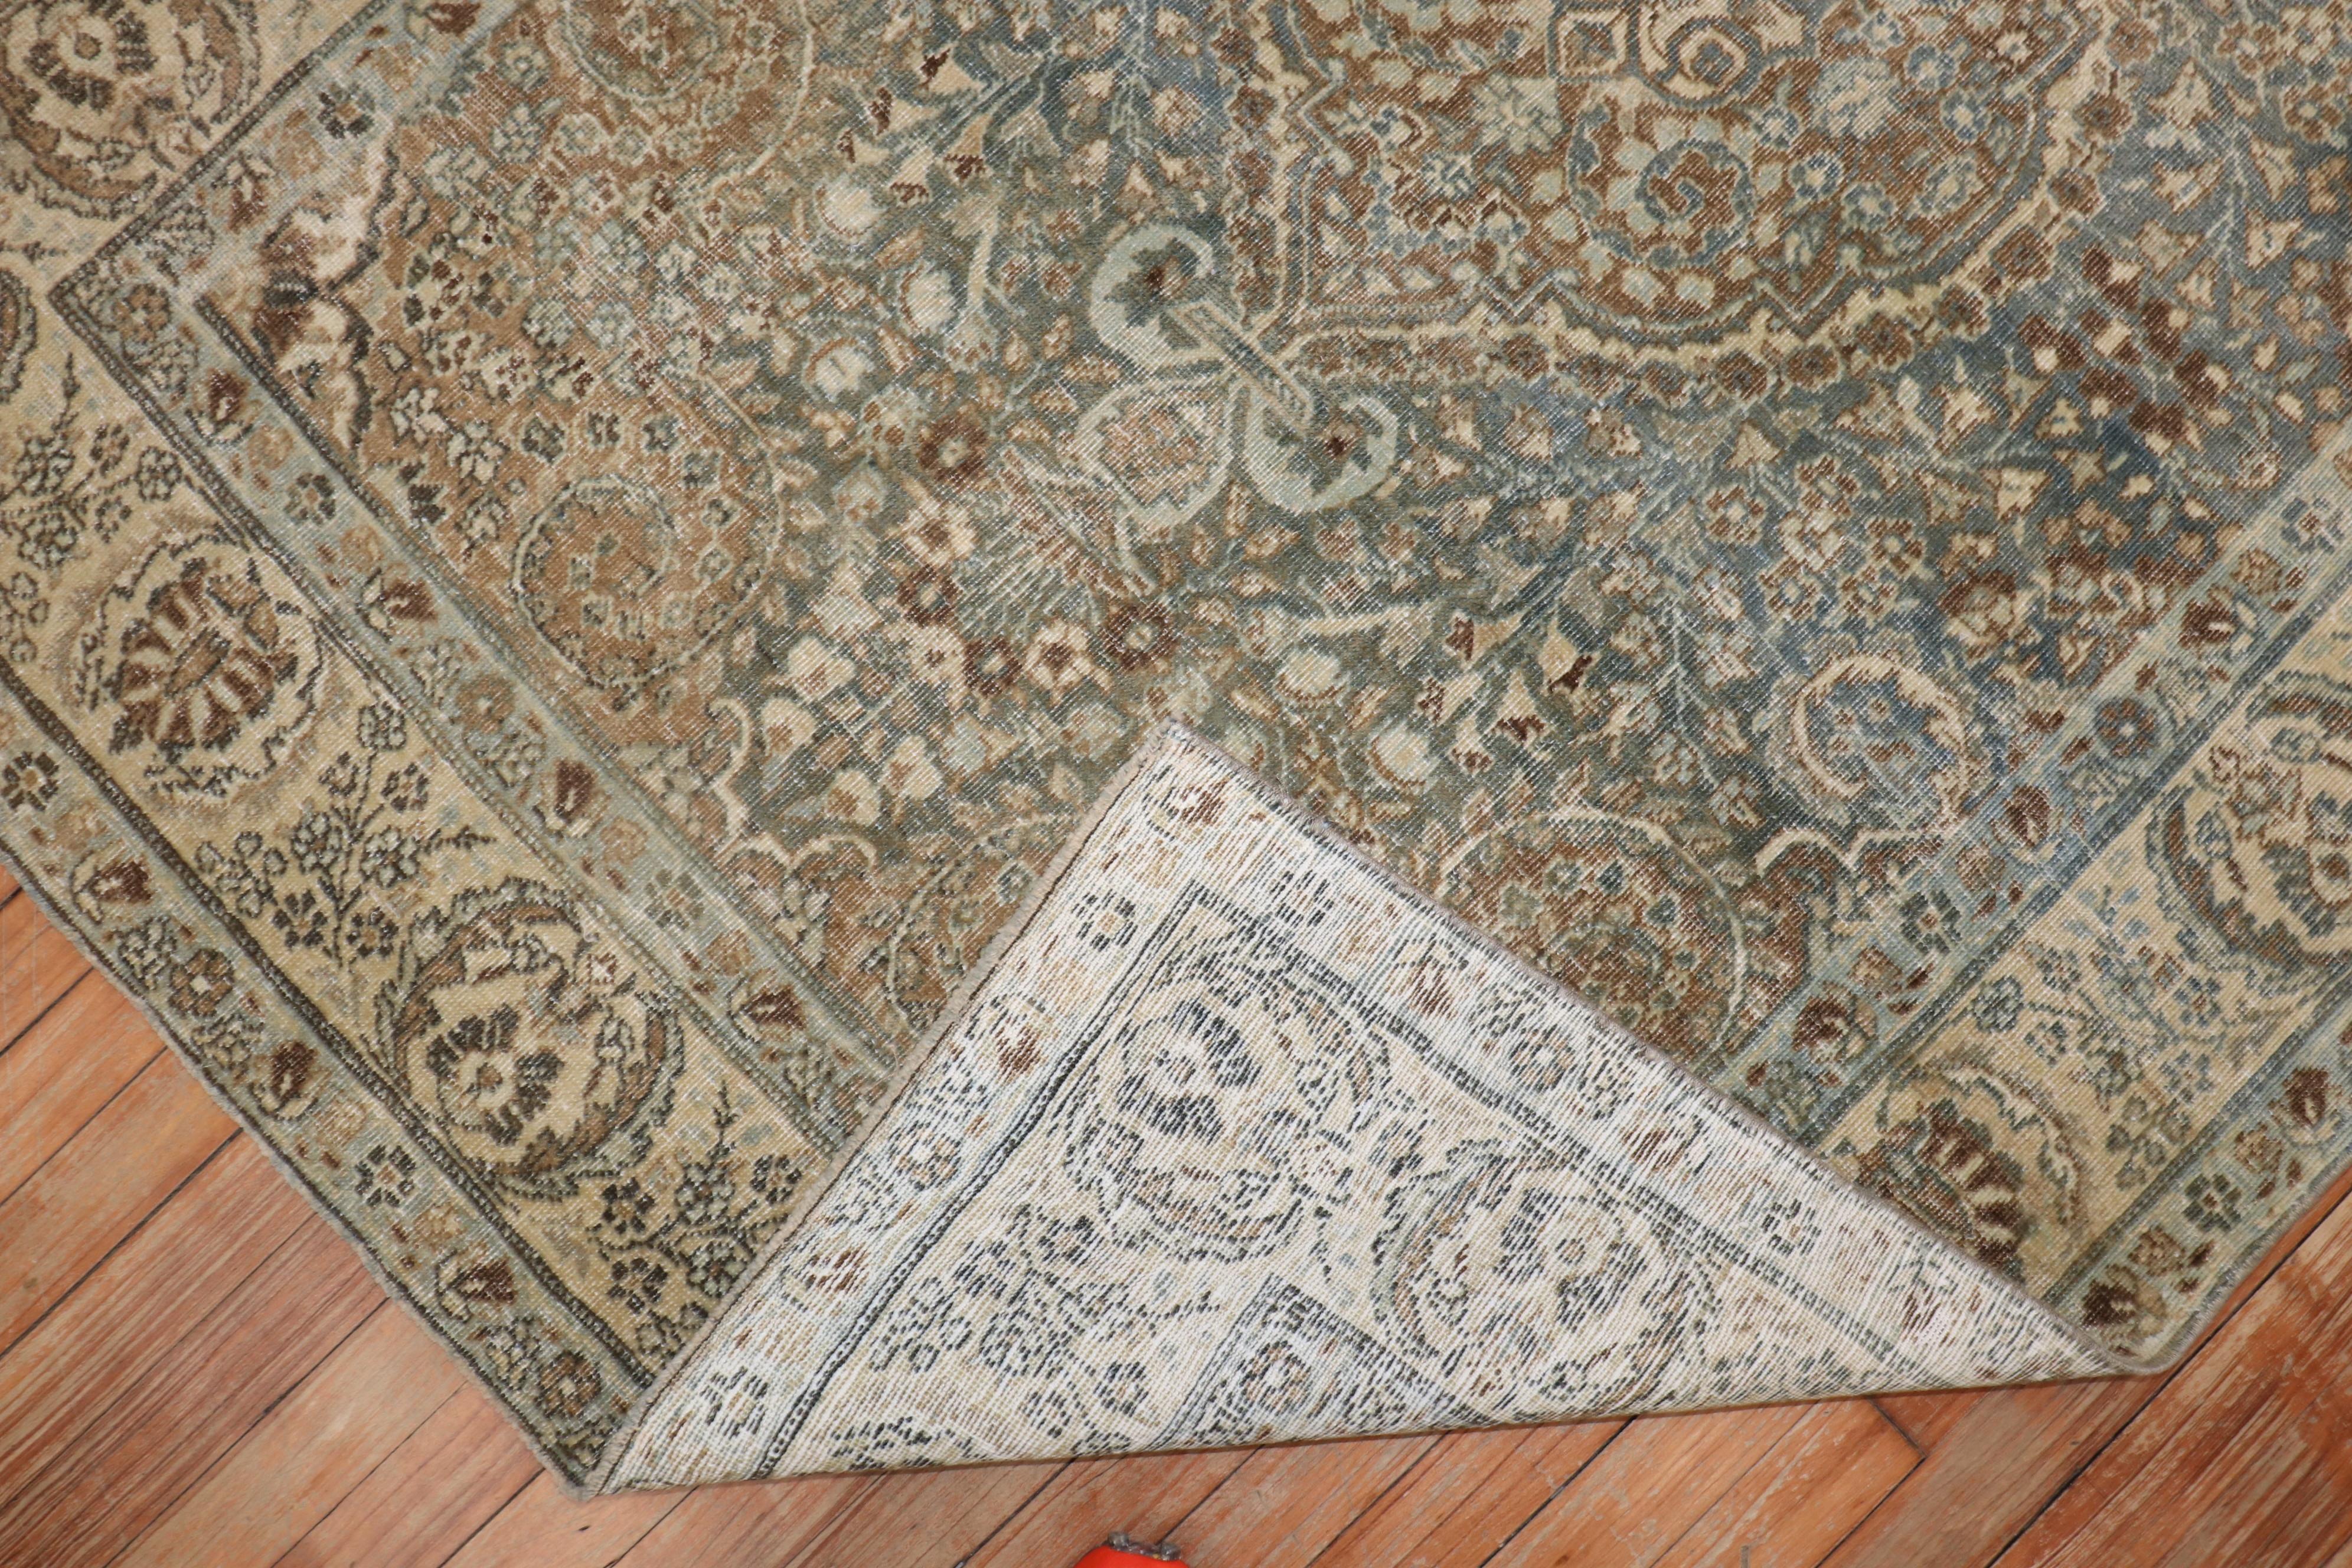 Antique Persian Tabriz Carpet In Good Condition For Sale In New York, NY